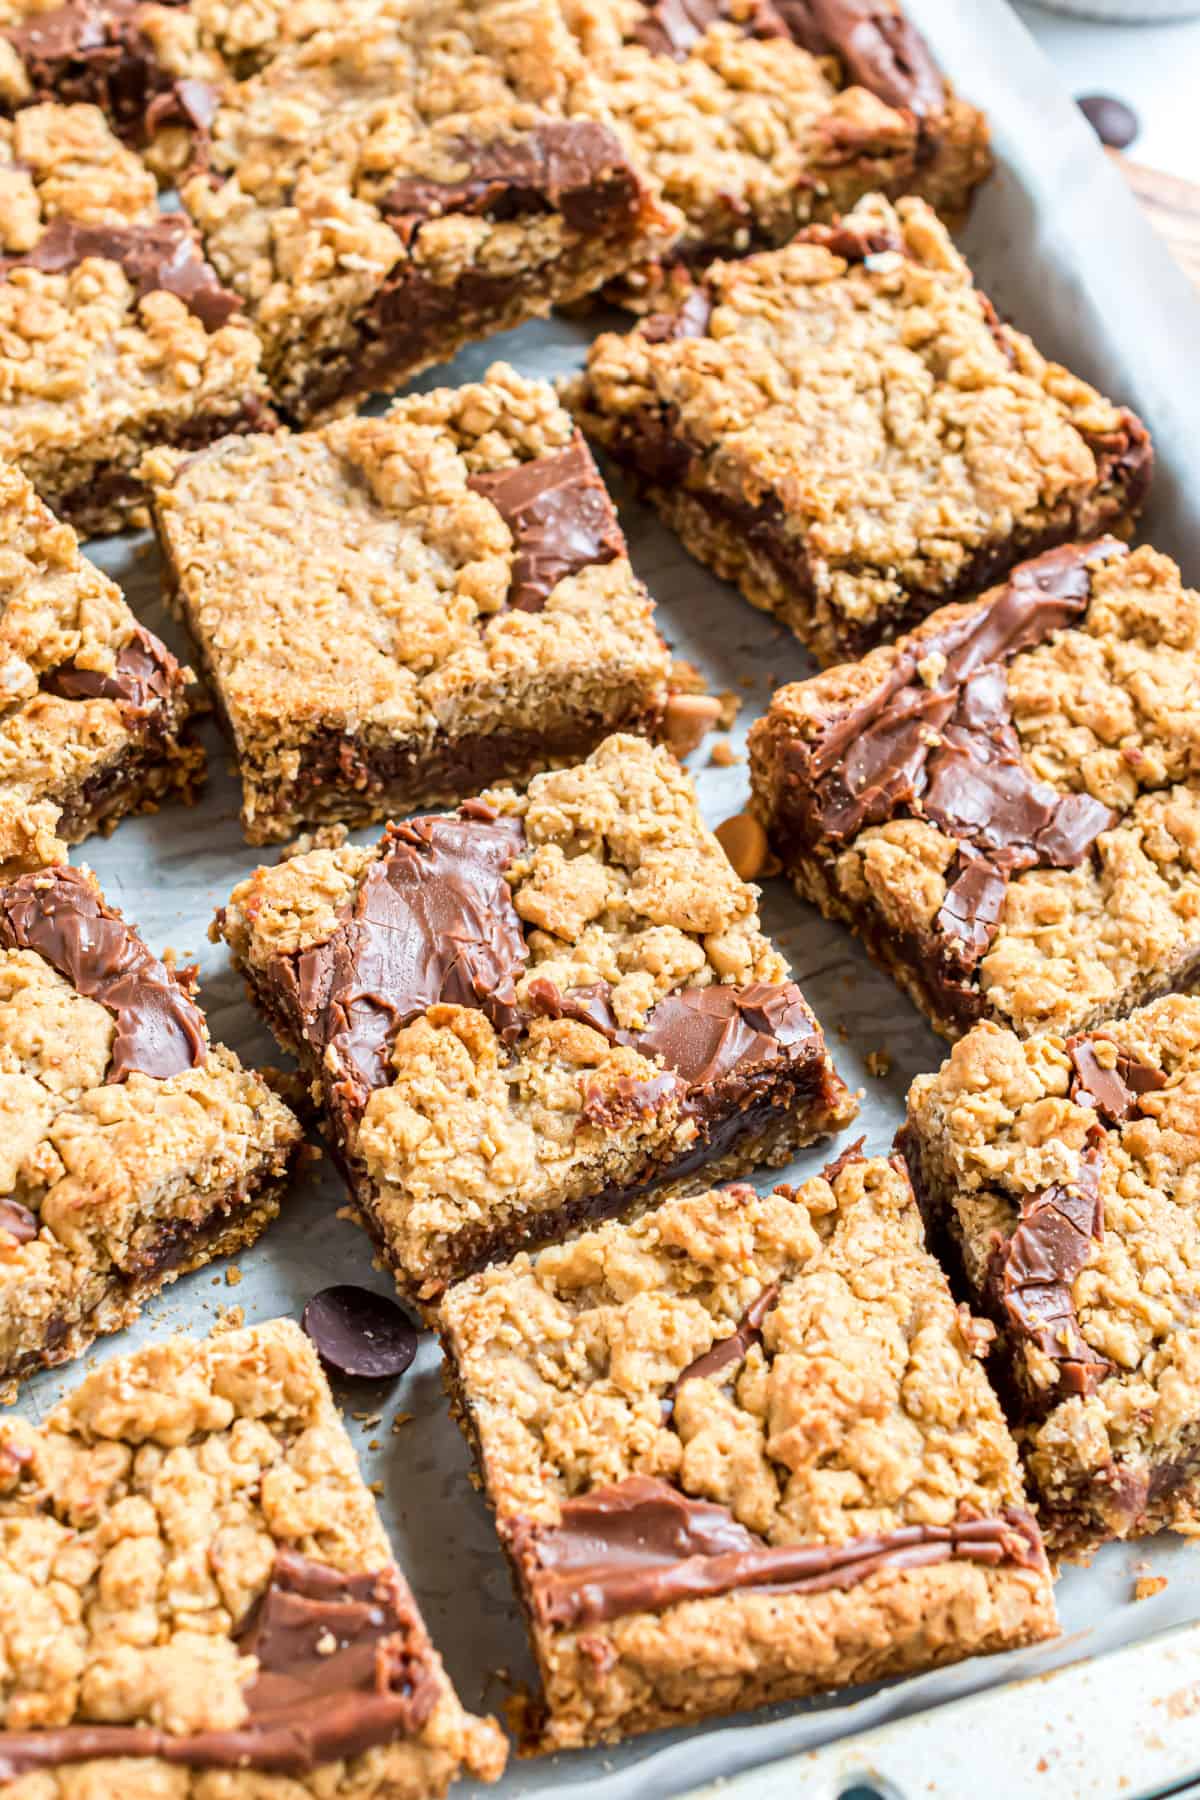 Oatmeal cookie bars with fudge filling cut into squares.